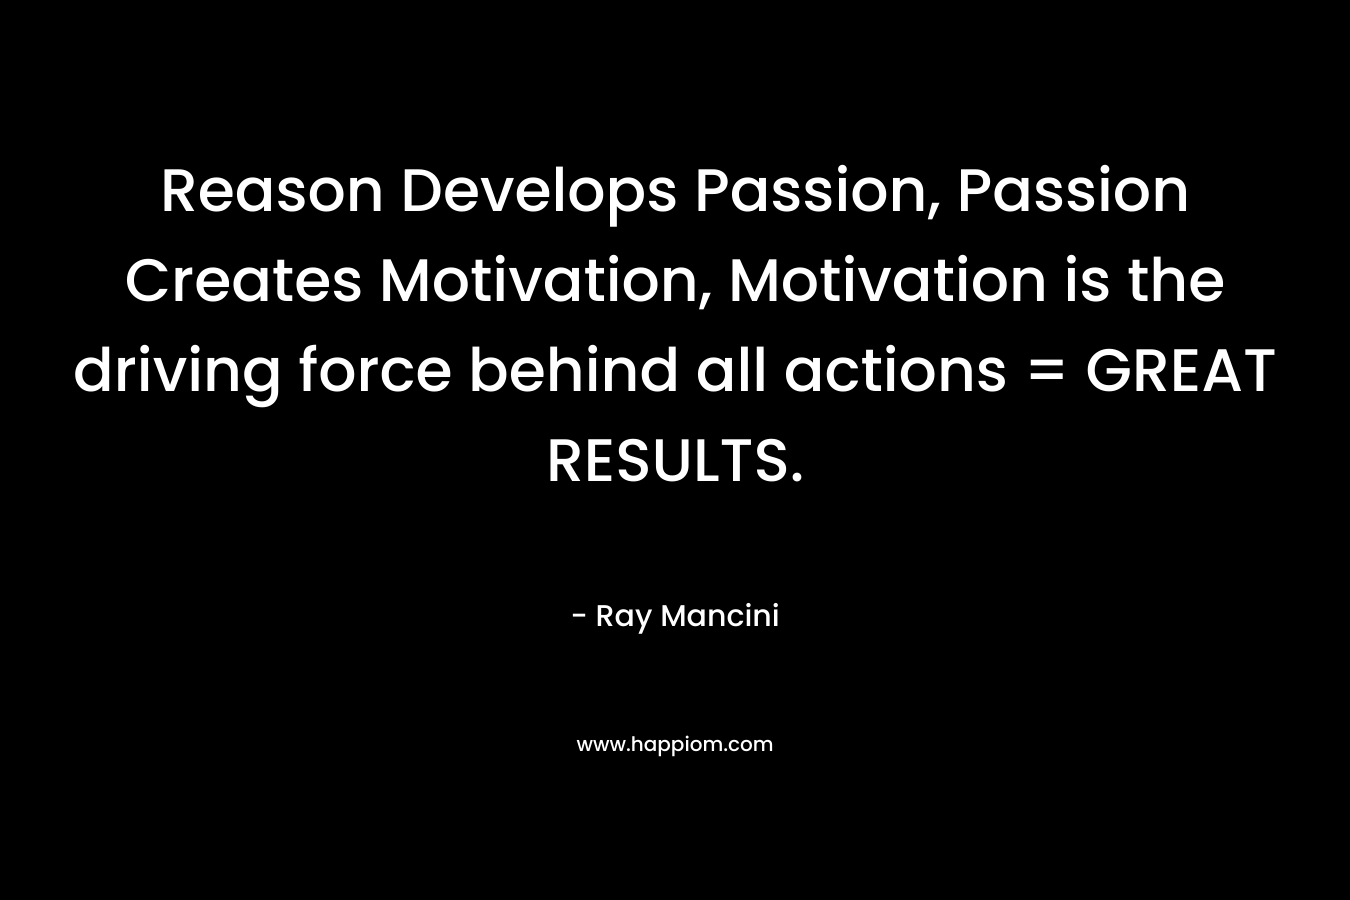 Reason Develops Passion, Passion Creates Motivation, Motivation is the driving force behind all actions = GREAT RESULTS.